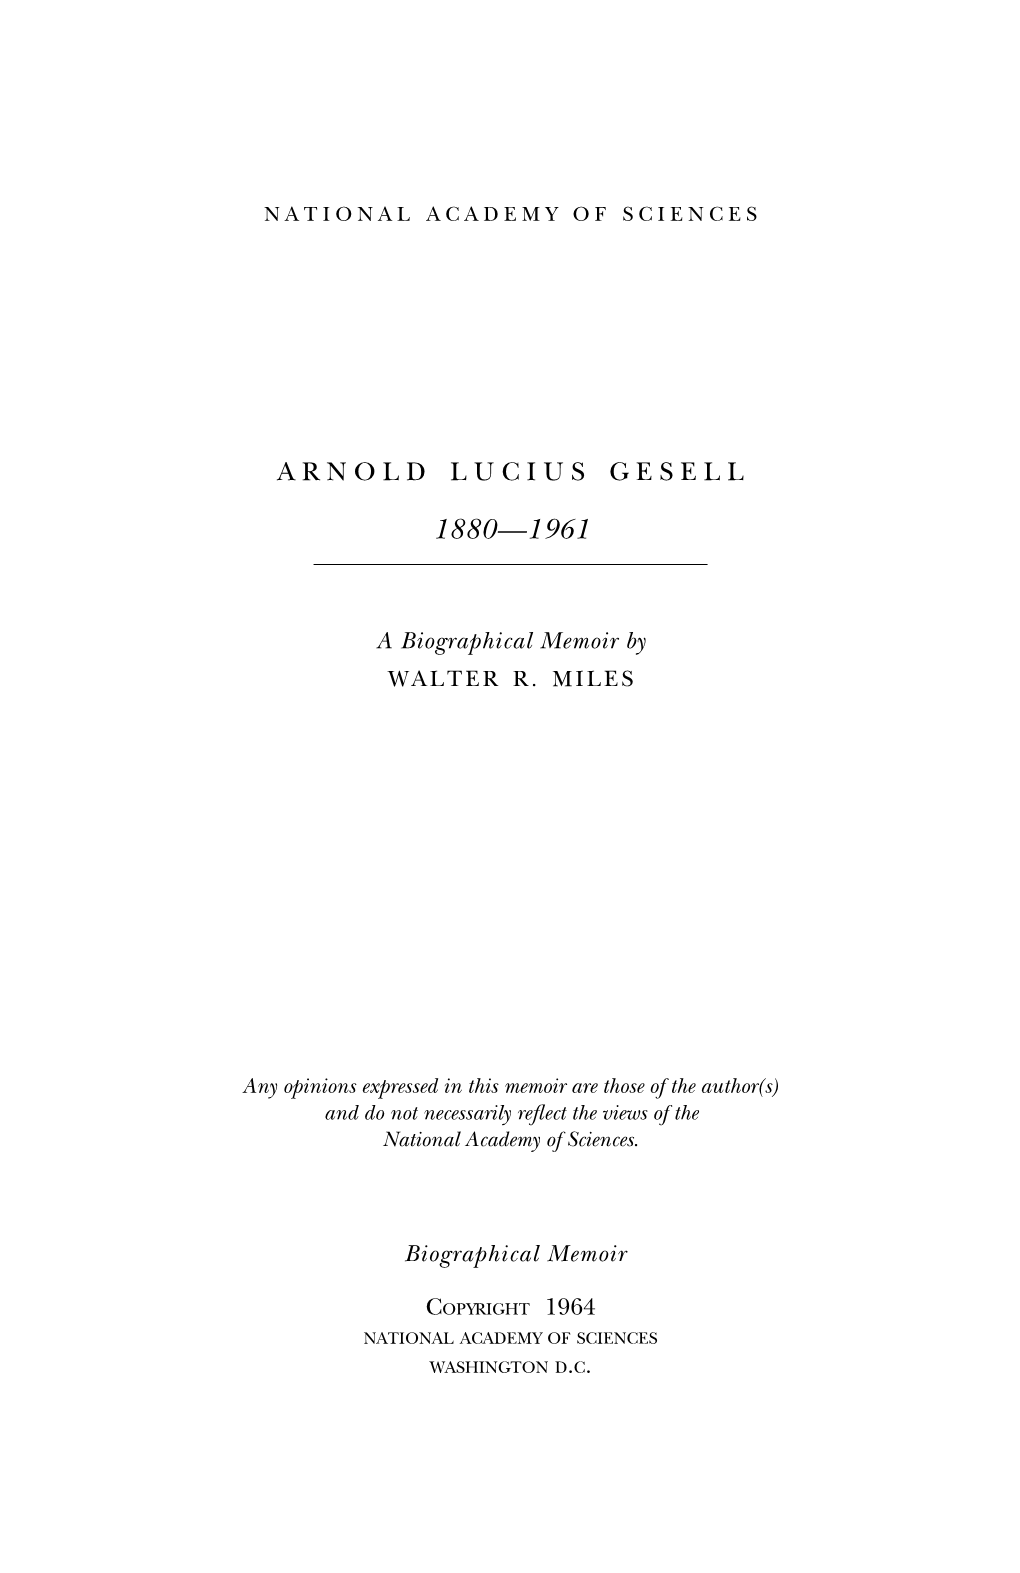 Biography of Arnold Lucius Gesell